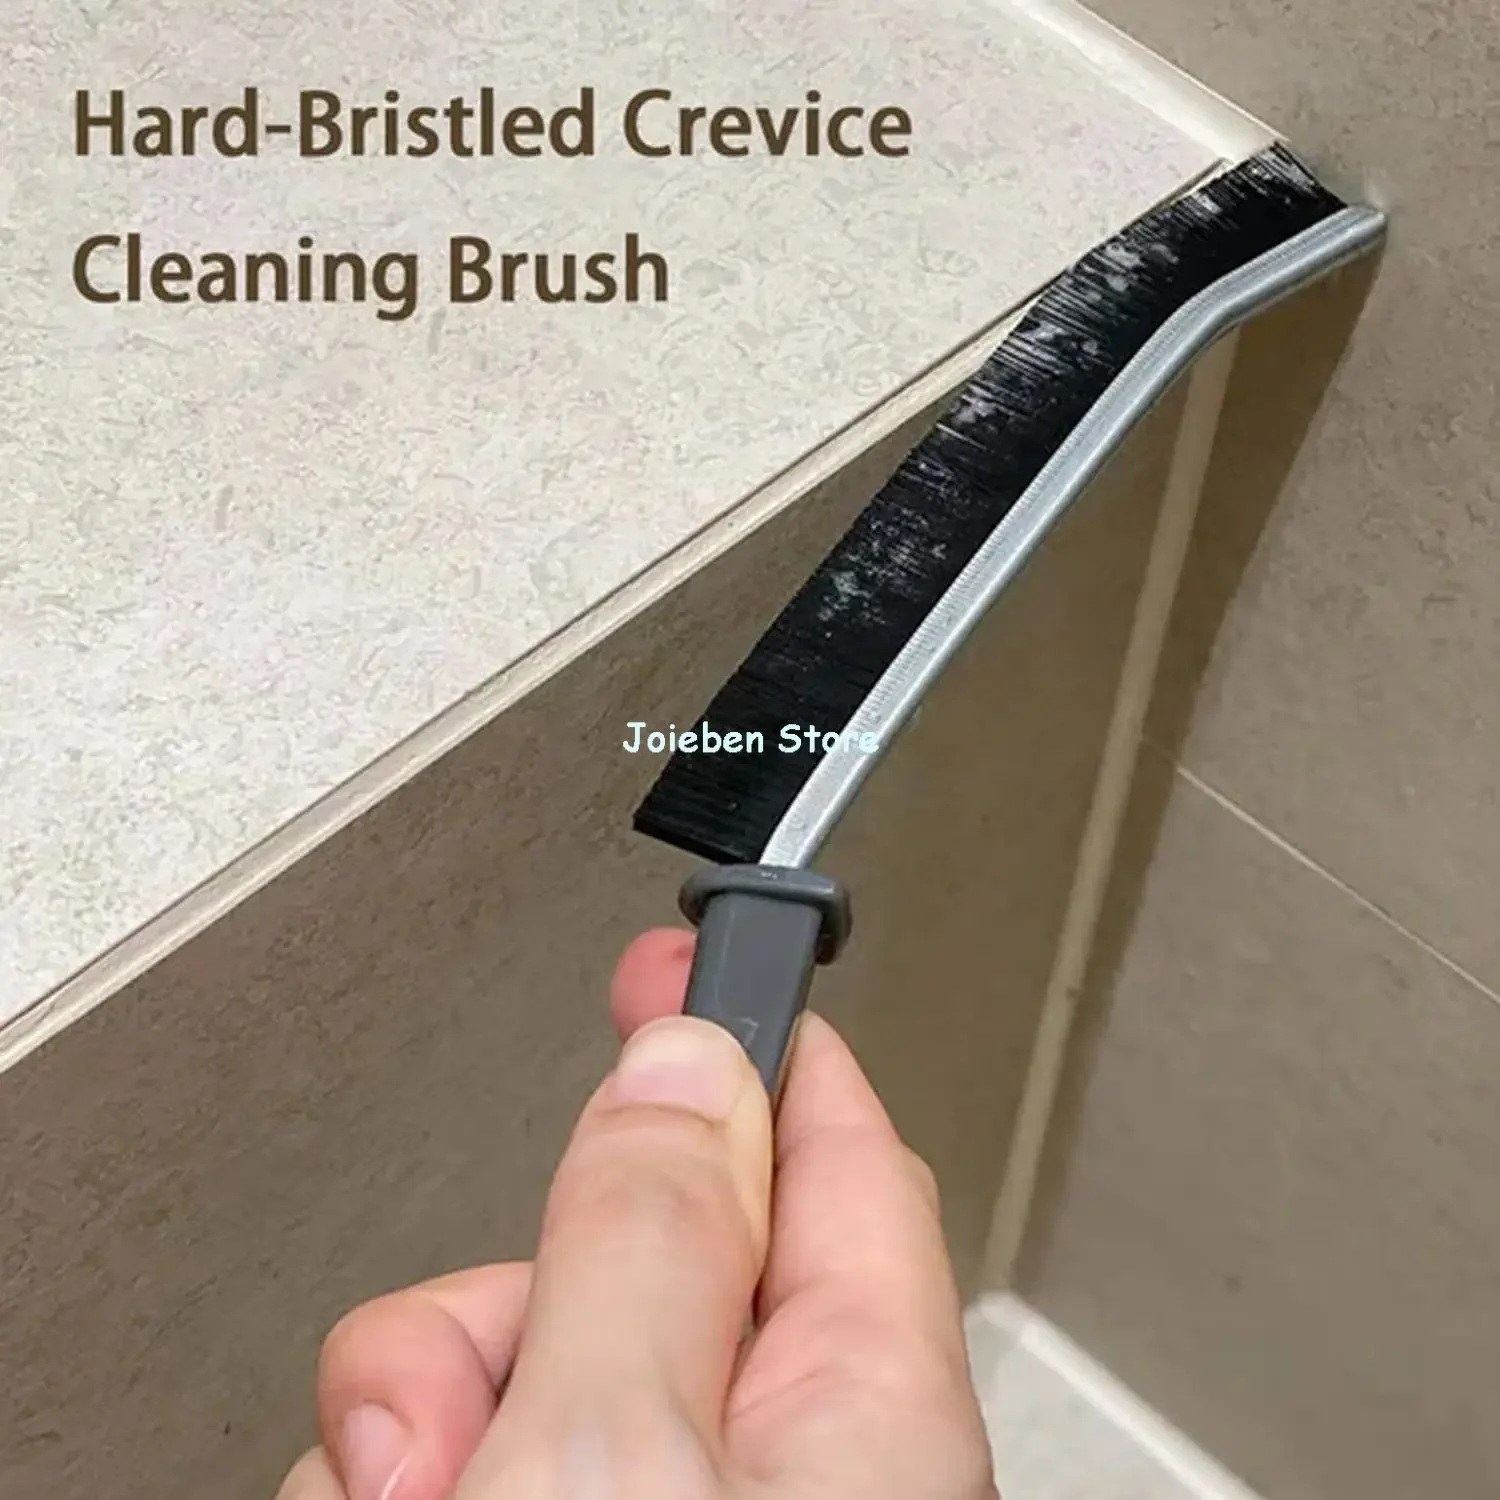 Hard-Bristled Crevice Cleaning Brush Grout Cleaner Scrub Brush Deep Tile Joints Crevice Gap Cleaning Brush Tools Accessories images - 6